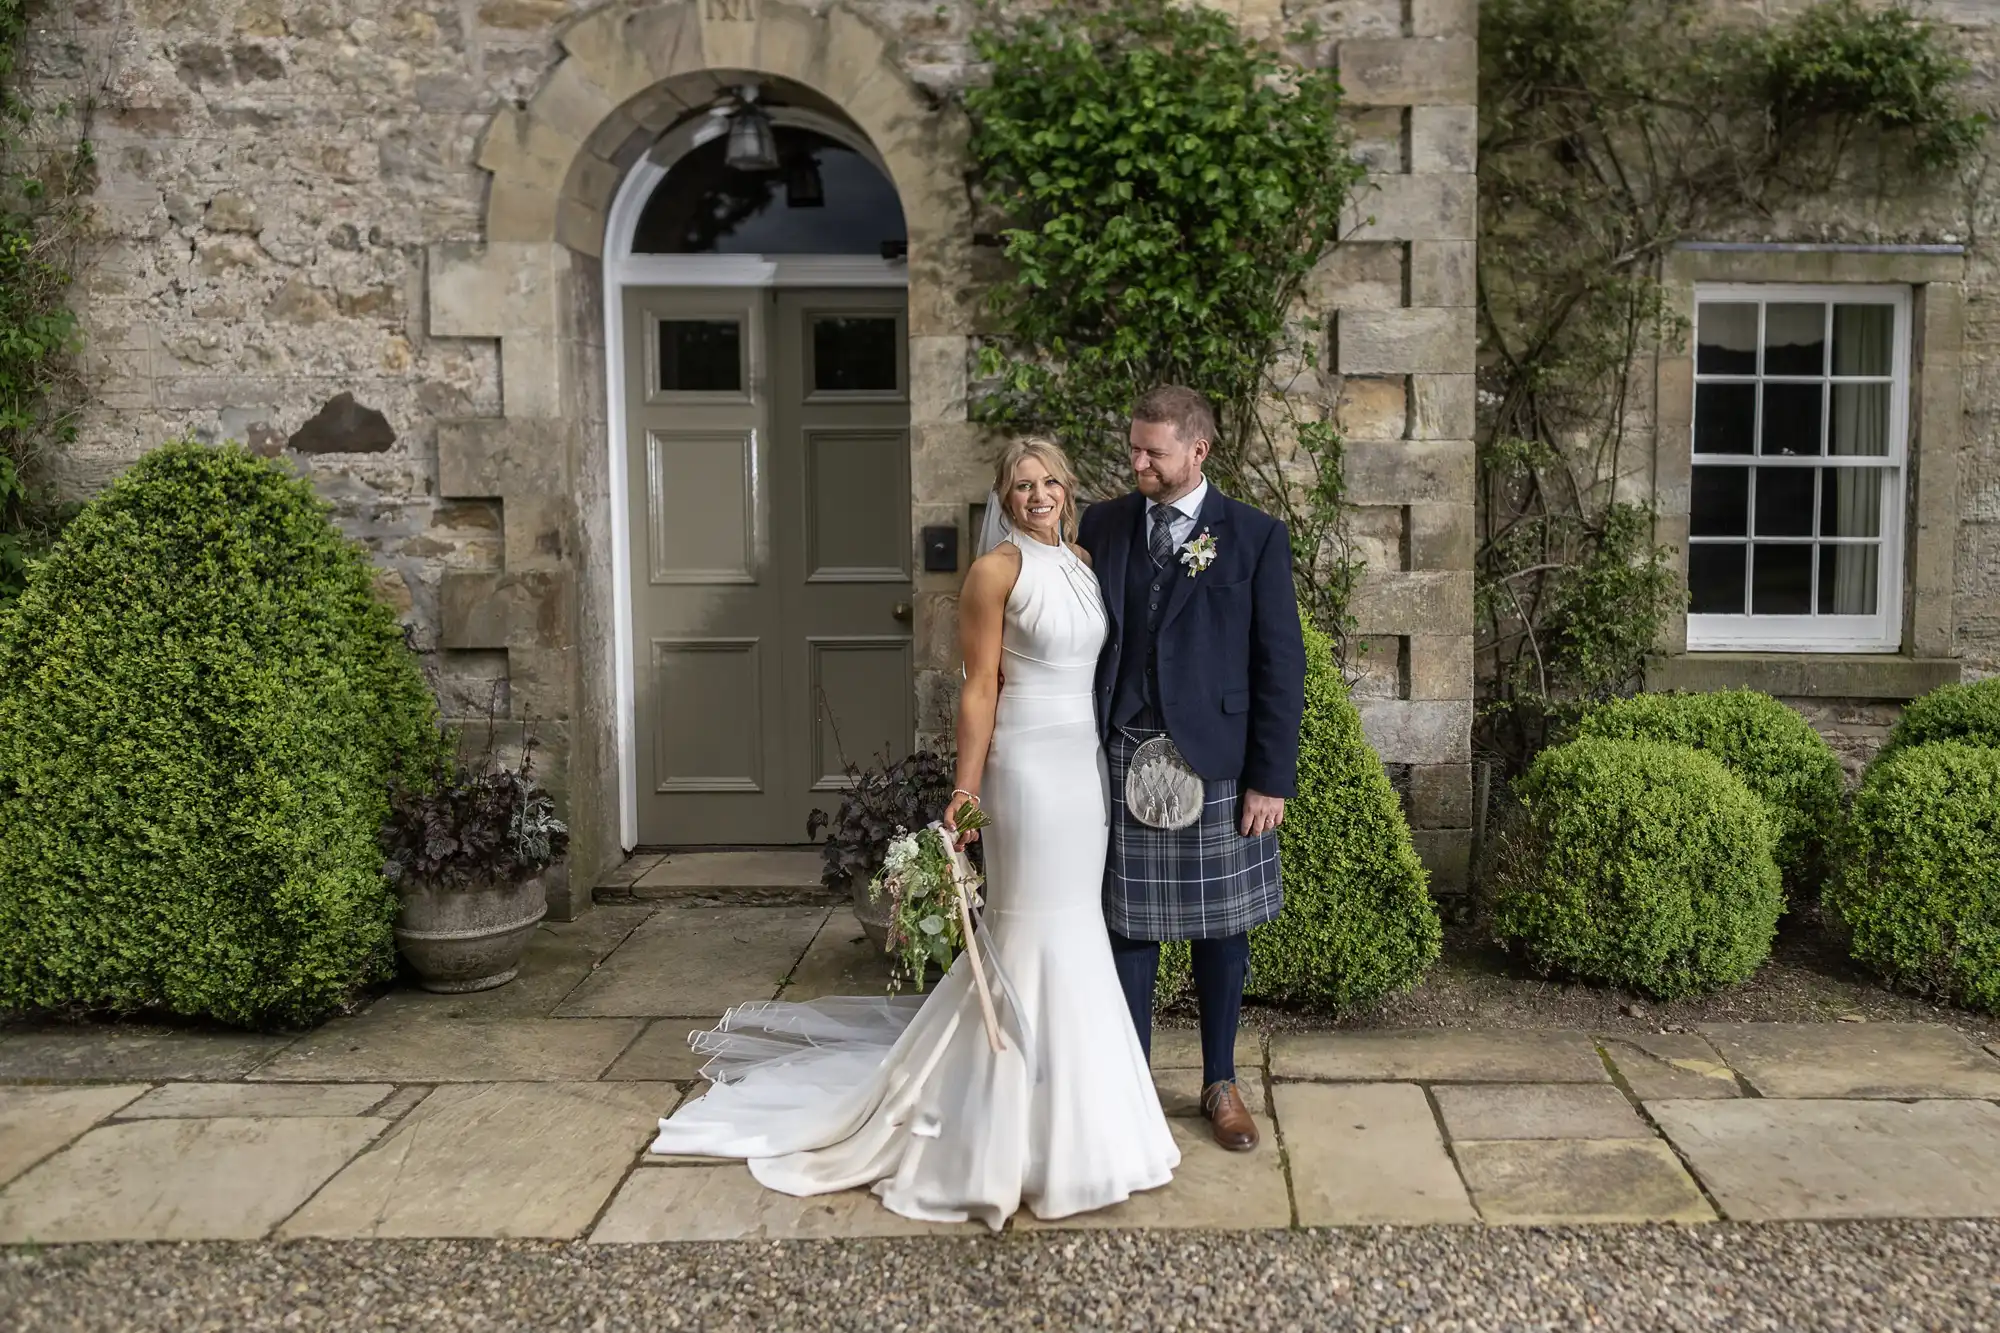 A bride in a white dress and a groom in a kilt stand smiling together outside a stone building flanked by shrubs.